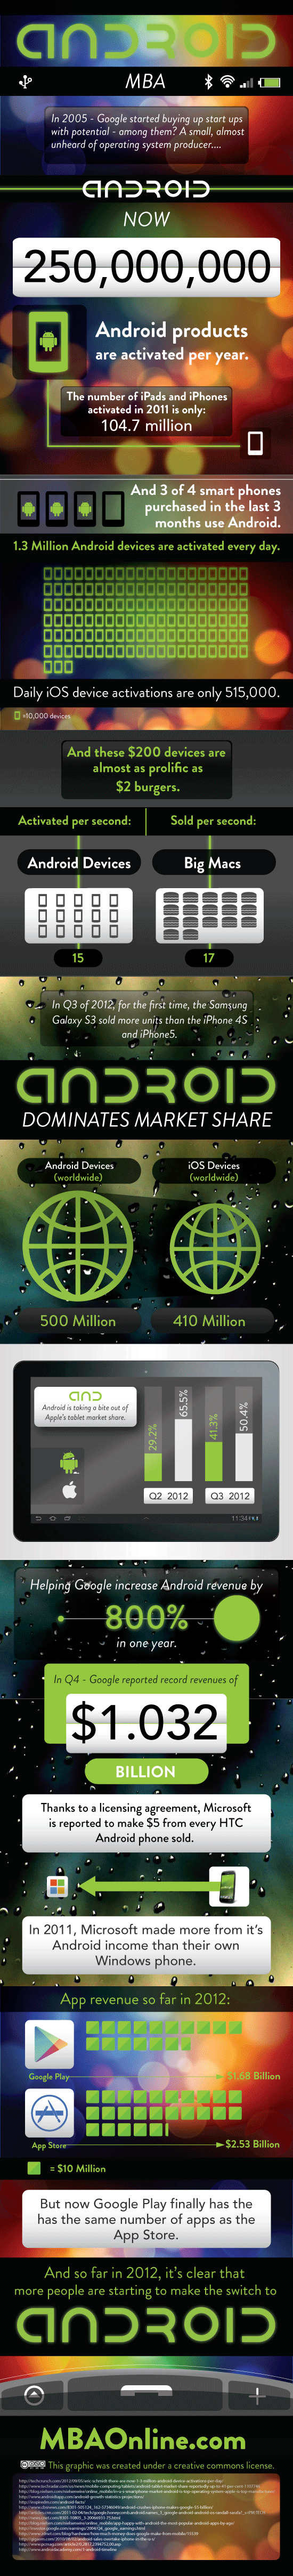 Android-infographic